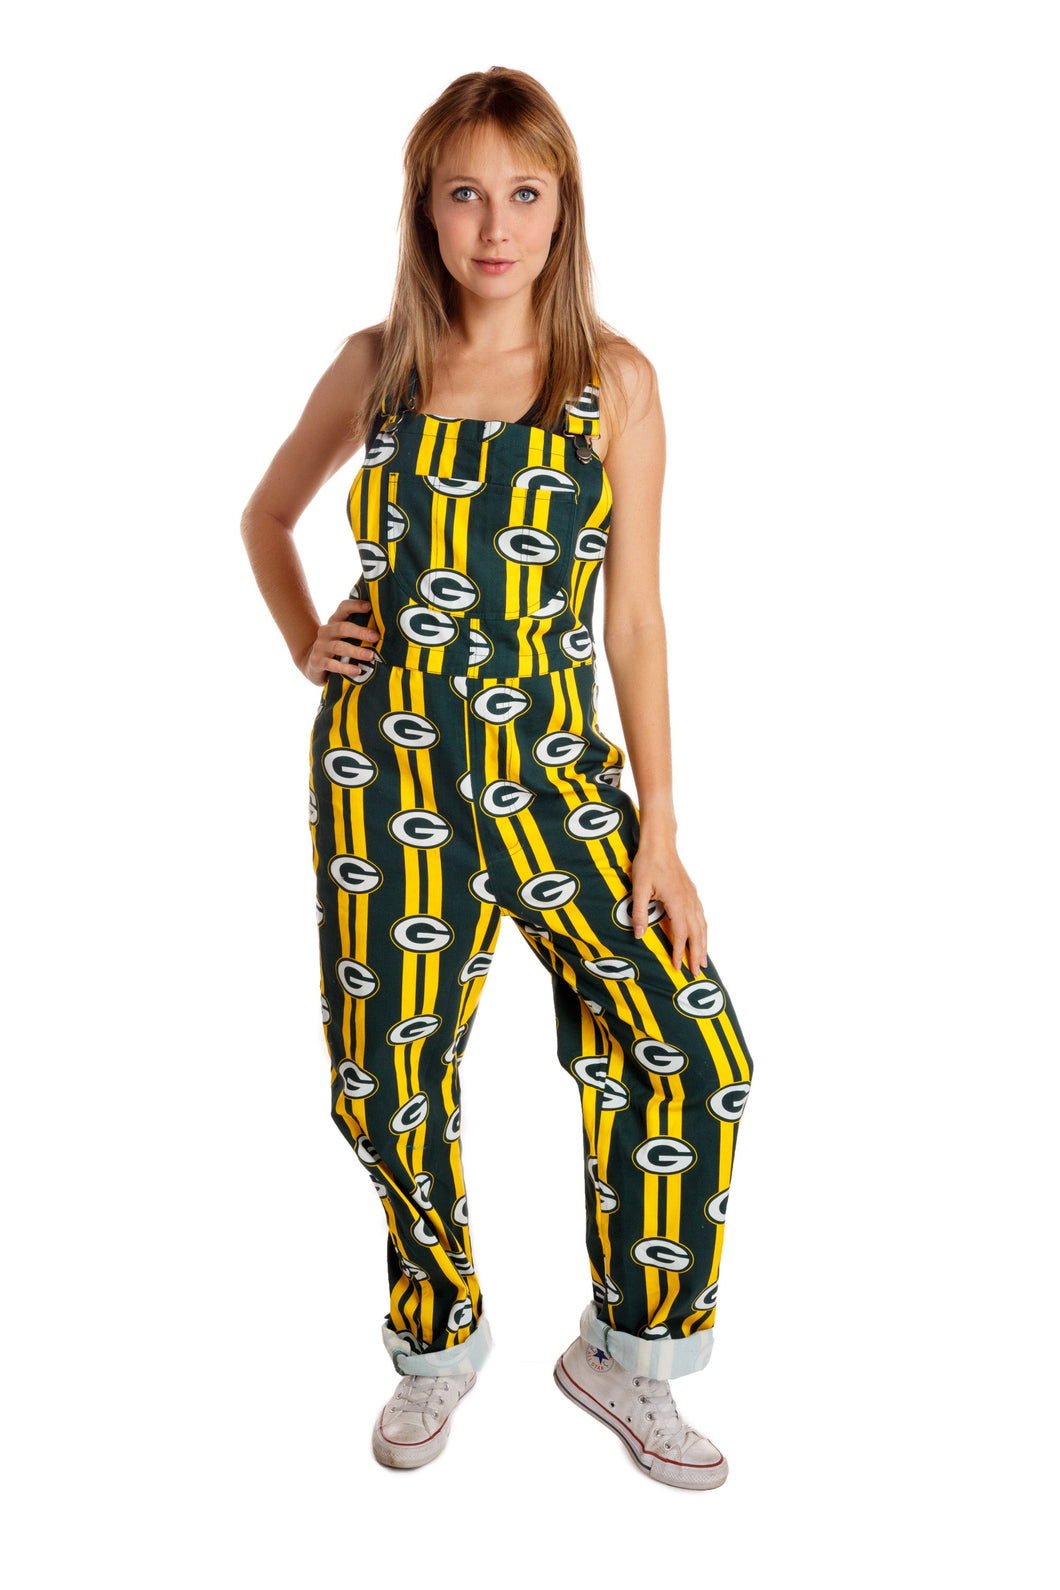 Green Bay Packers Overalls